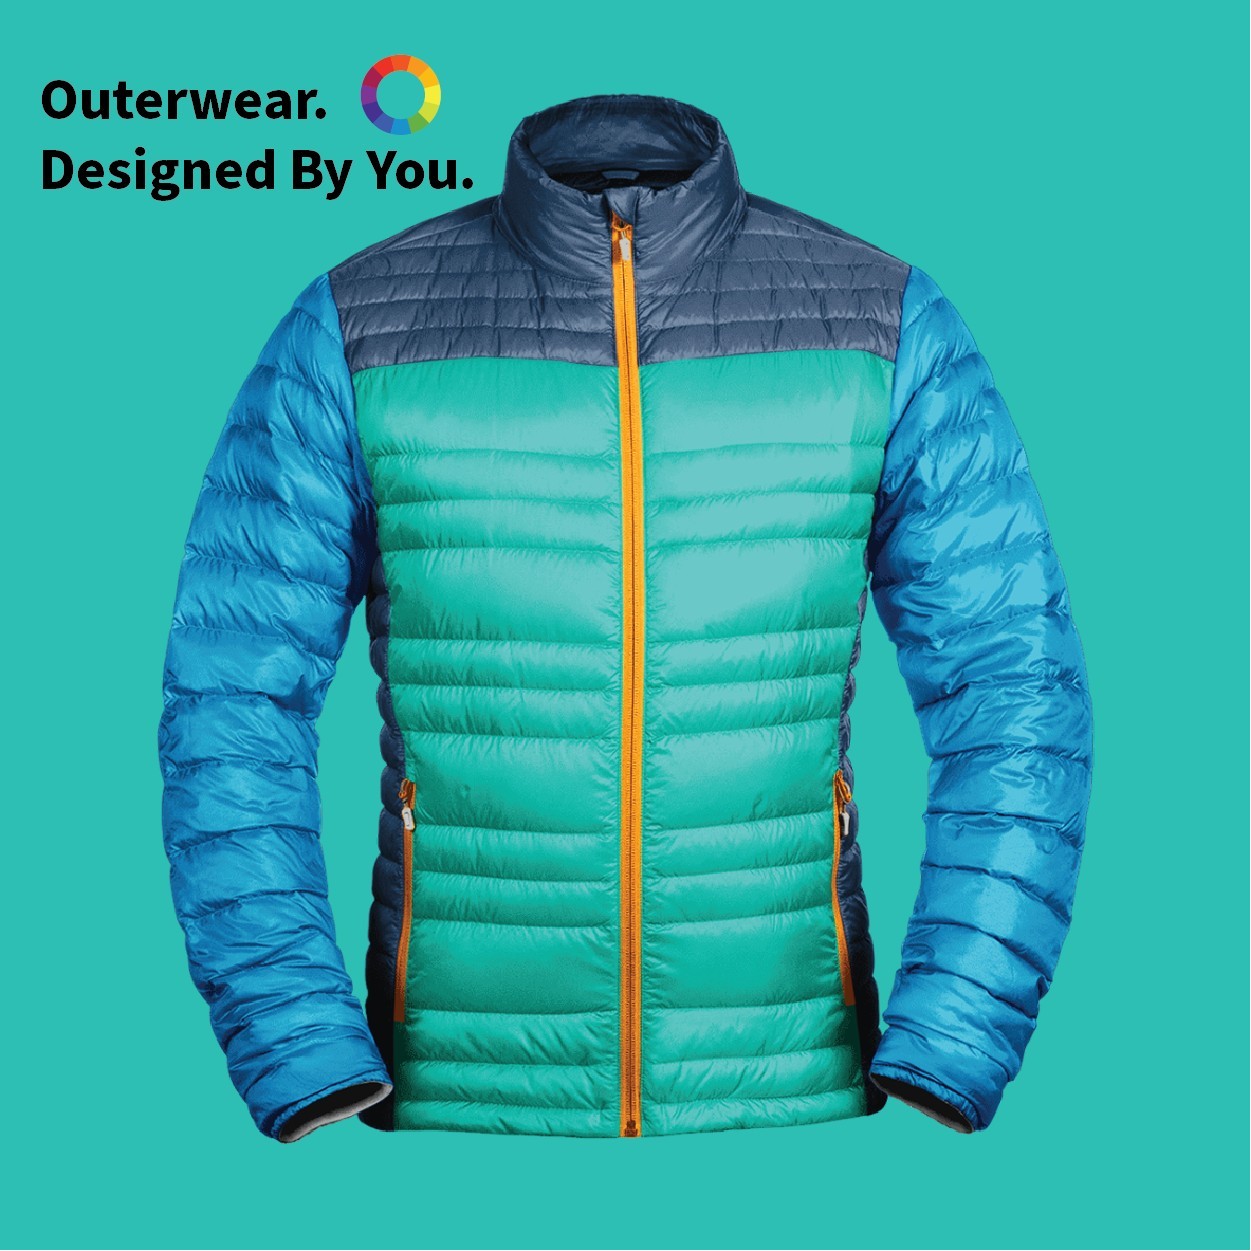 A down jacket with blue sleeves, a green body and yellow zipper. The jacket colors are completely customizable by the customer.